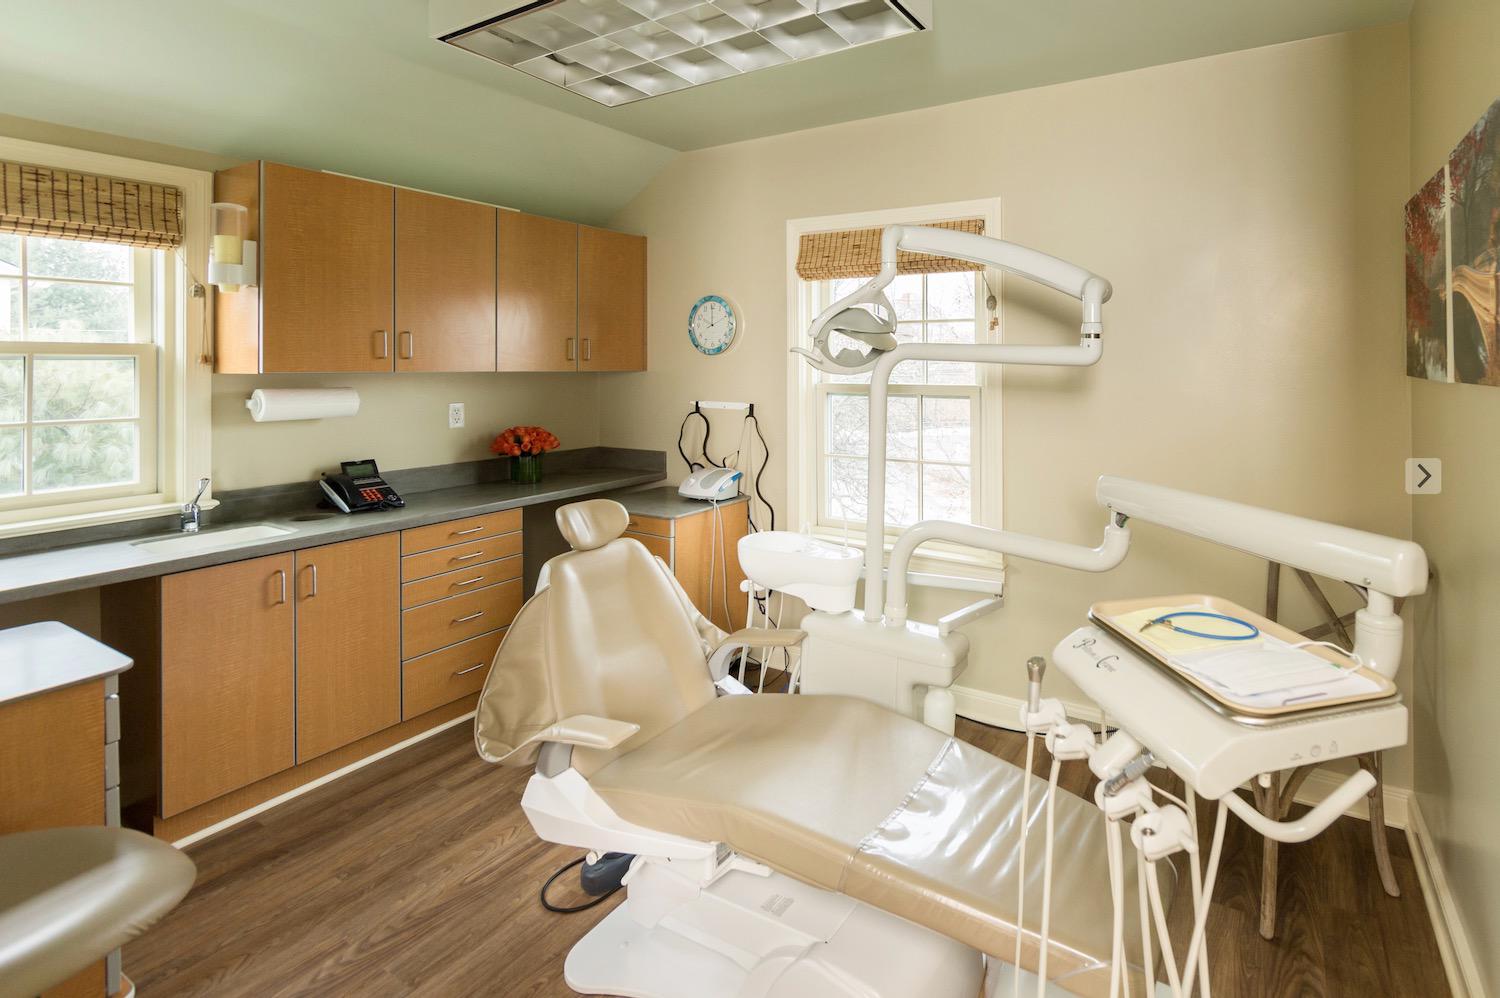 Imperial Dental Associates provides a range of dental services to both adults and children. A true family dental practice located in Westport, Connecticut, you won’t have to find a separate pediatric dentist for your kids. Our location on Imperial Avenue is very convenient to access from many popular retailers, office complexes, and schools. Many of our patients make the short drive over from nearby Norwalk and Fairfield. 

While the practice is open daily during the week and we are open every other Saturday to make it even easier to get the dental care that you need. You won’t need to miss work or take your kids out of school to go to the dentist, which is something that is very important for many of our patients.